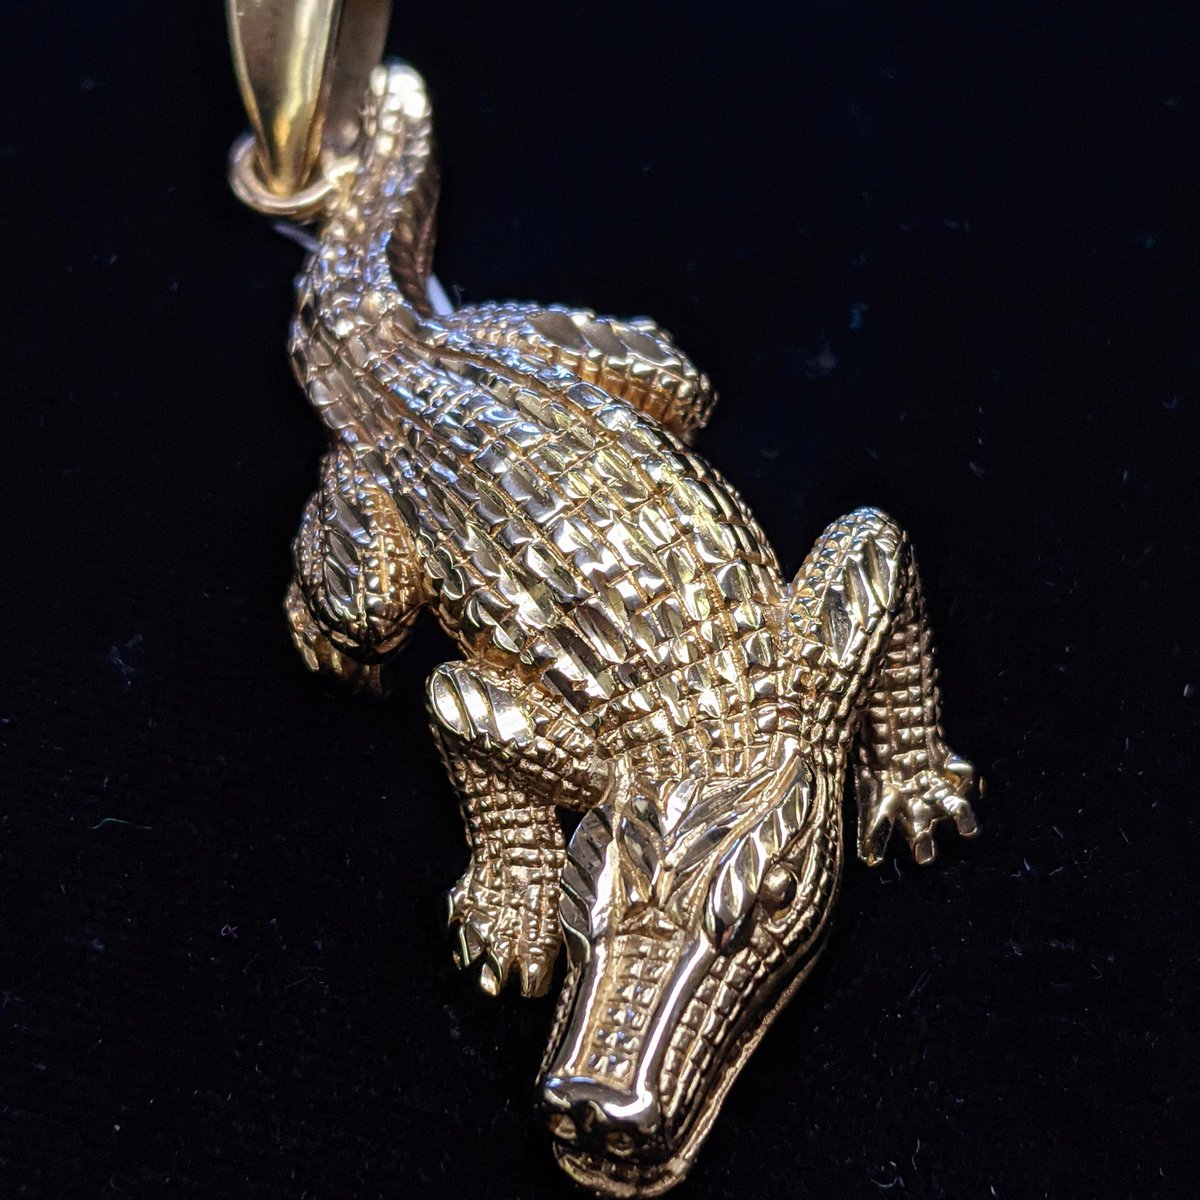 14KT Yellow Gold Alligator Charm Pendant 11.8 Grams for $750! Just Over 2 Inches Long!
.
#14kt #14kgold #jewelryoftheday #deltona #deltonaflorida #debaryfl #volusia #volusiacounty #centralflorida